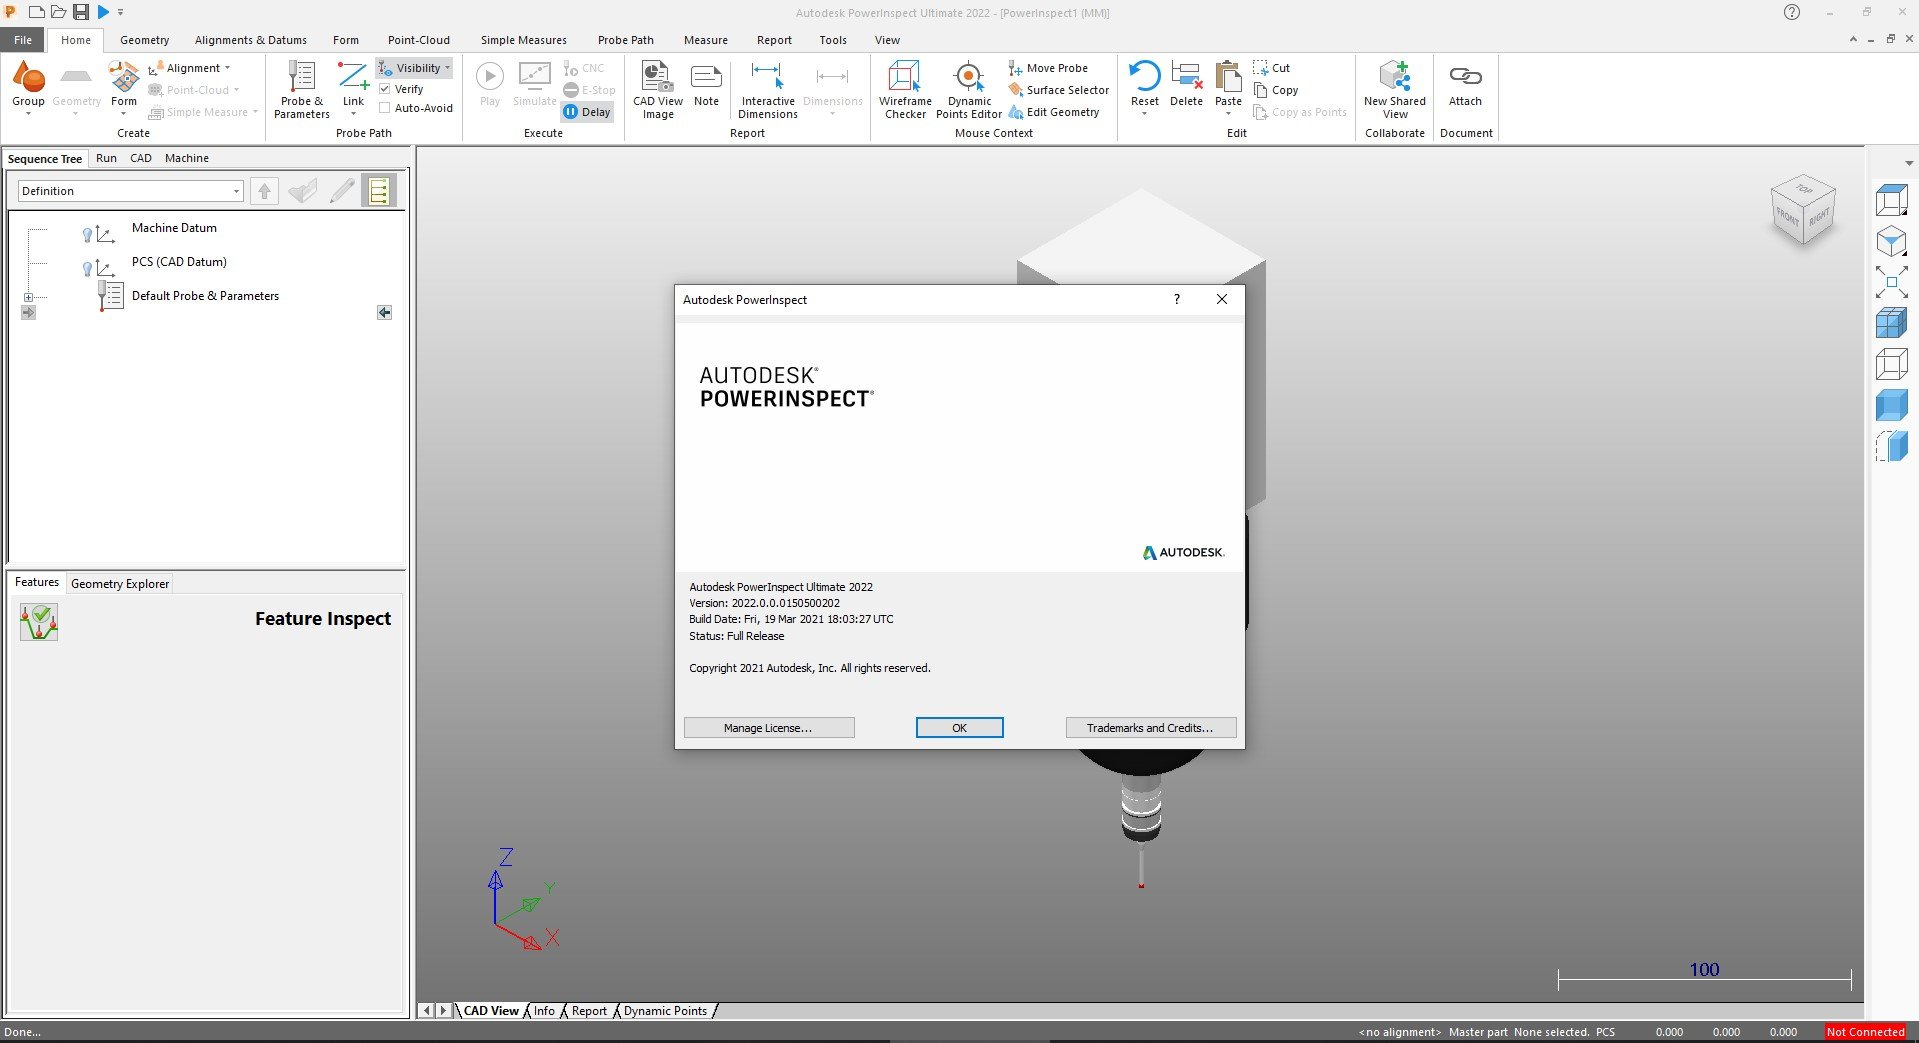 Working with Autodesk PowerInspect Ultimate full license